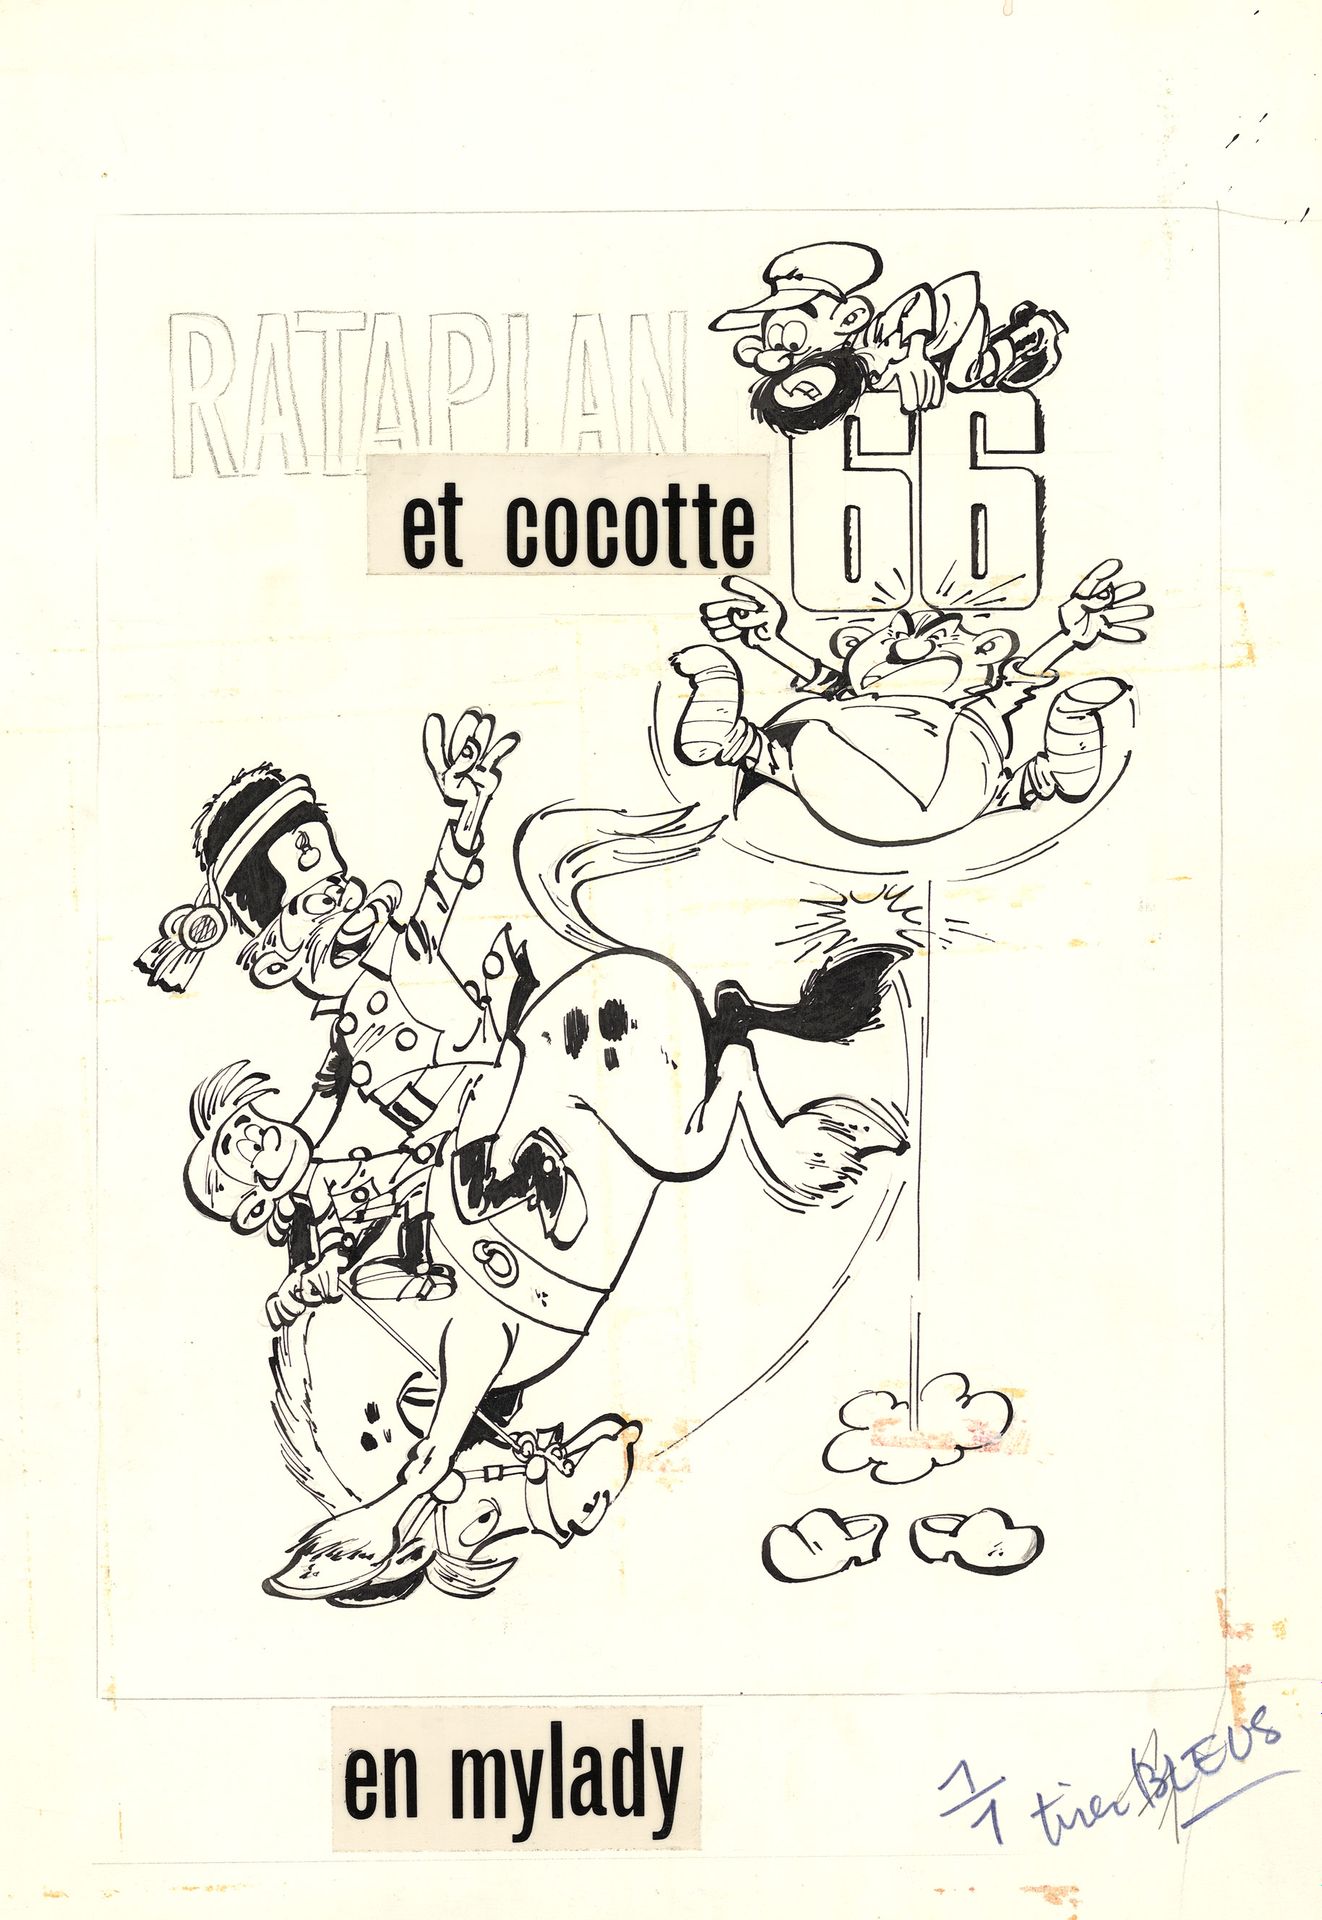 BERCK (1929-2020) Rataplan et cocotte 66
India ink on paper for the album cover.&hellip;